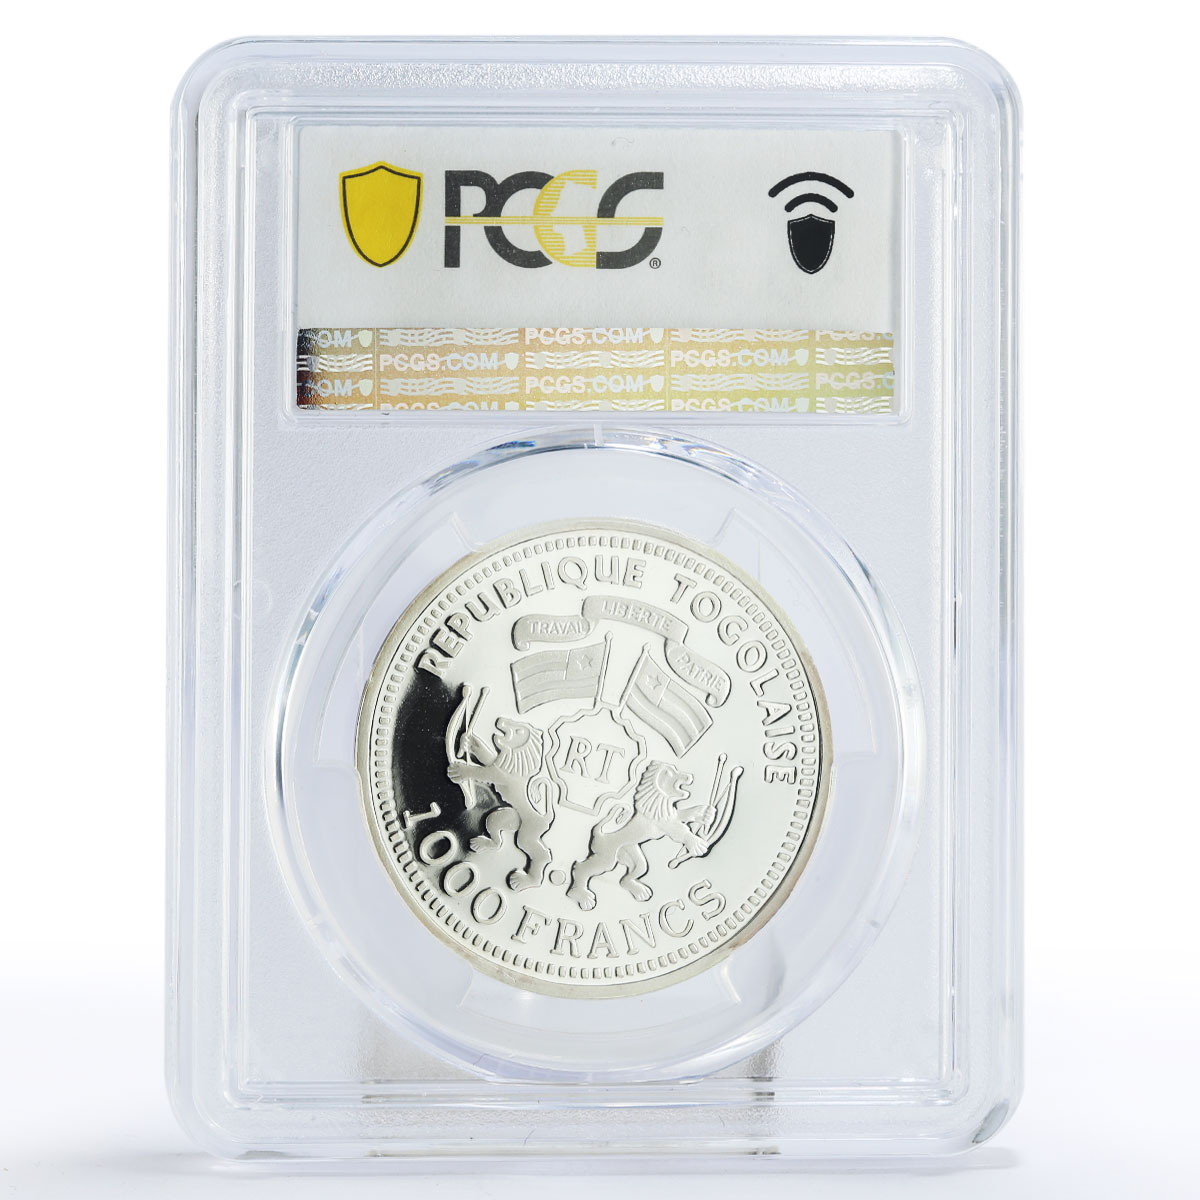 Togo 1000 francs Religion Reformation Martin Luther PR69 PCGS silver coin 1999